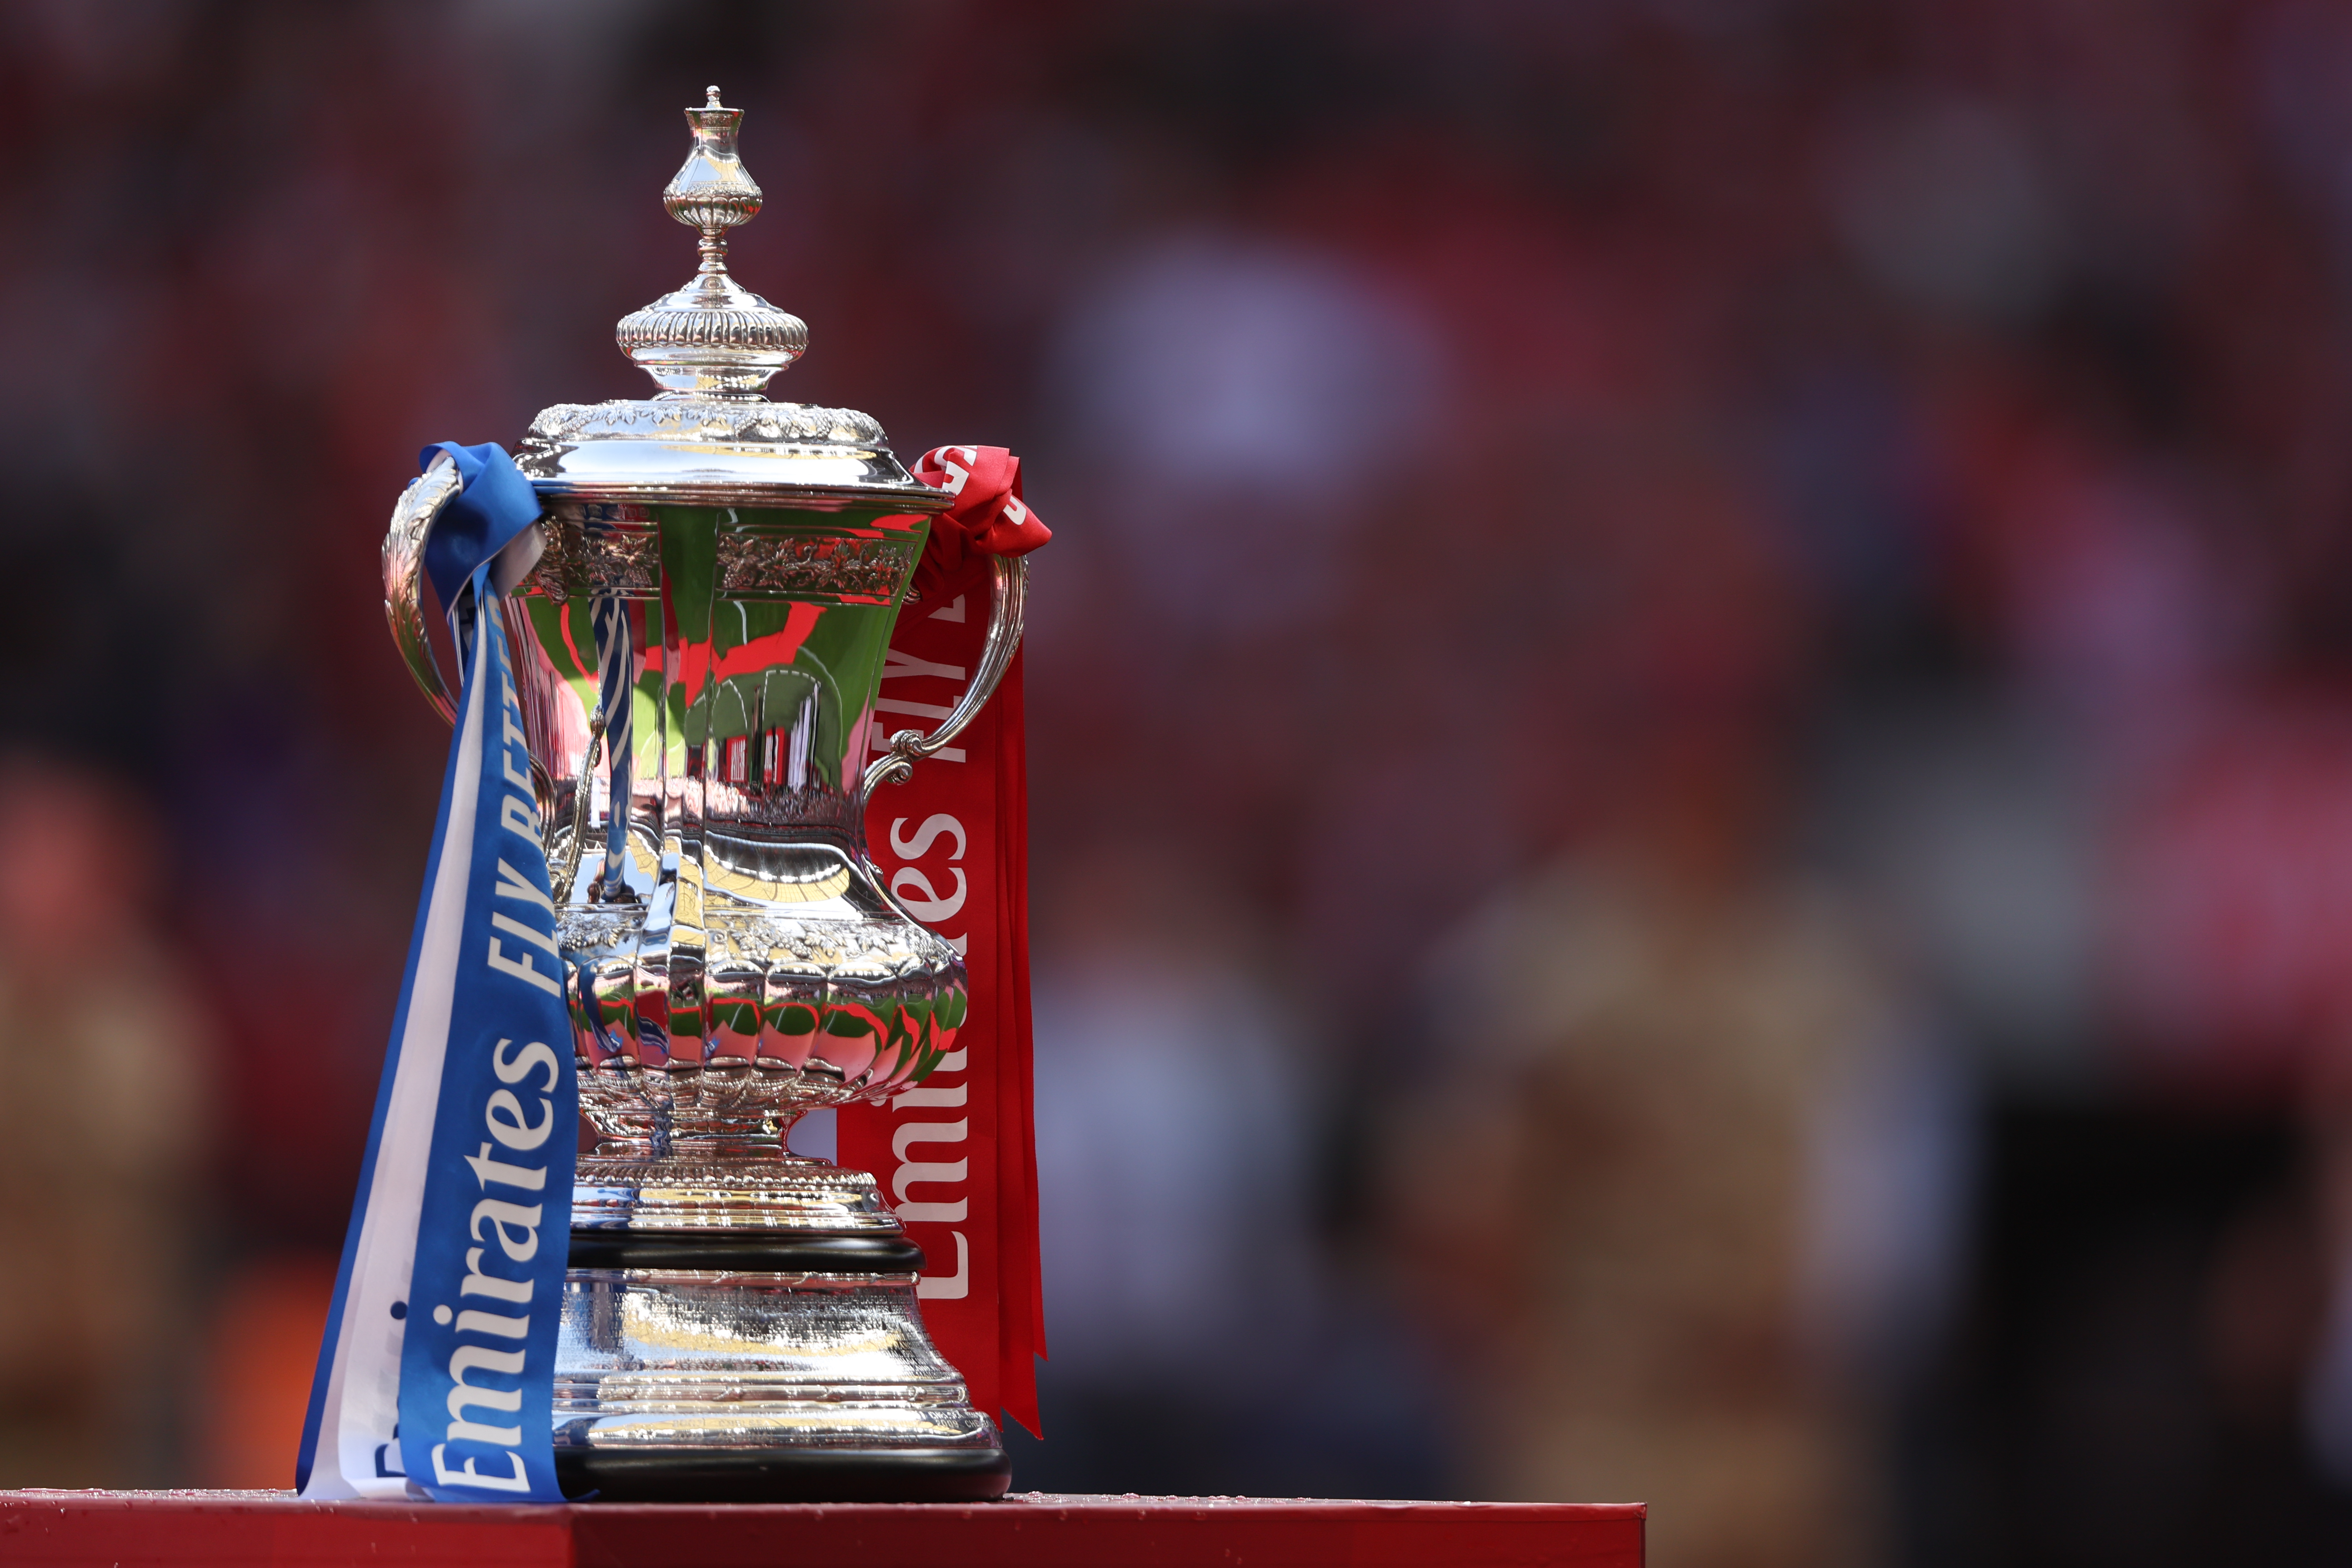 The official Emirates FA Cup Trophy during The FA Cup Final match between Chelsea and Liverpool at Wembley Stadium on May 14, 2022 in London, England.